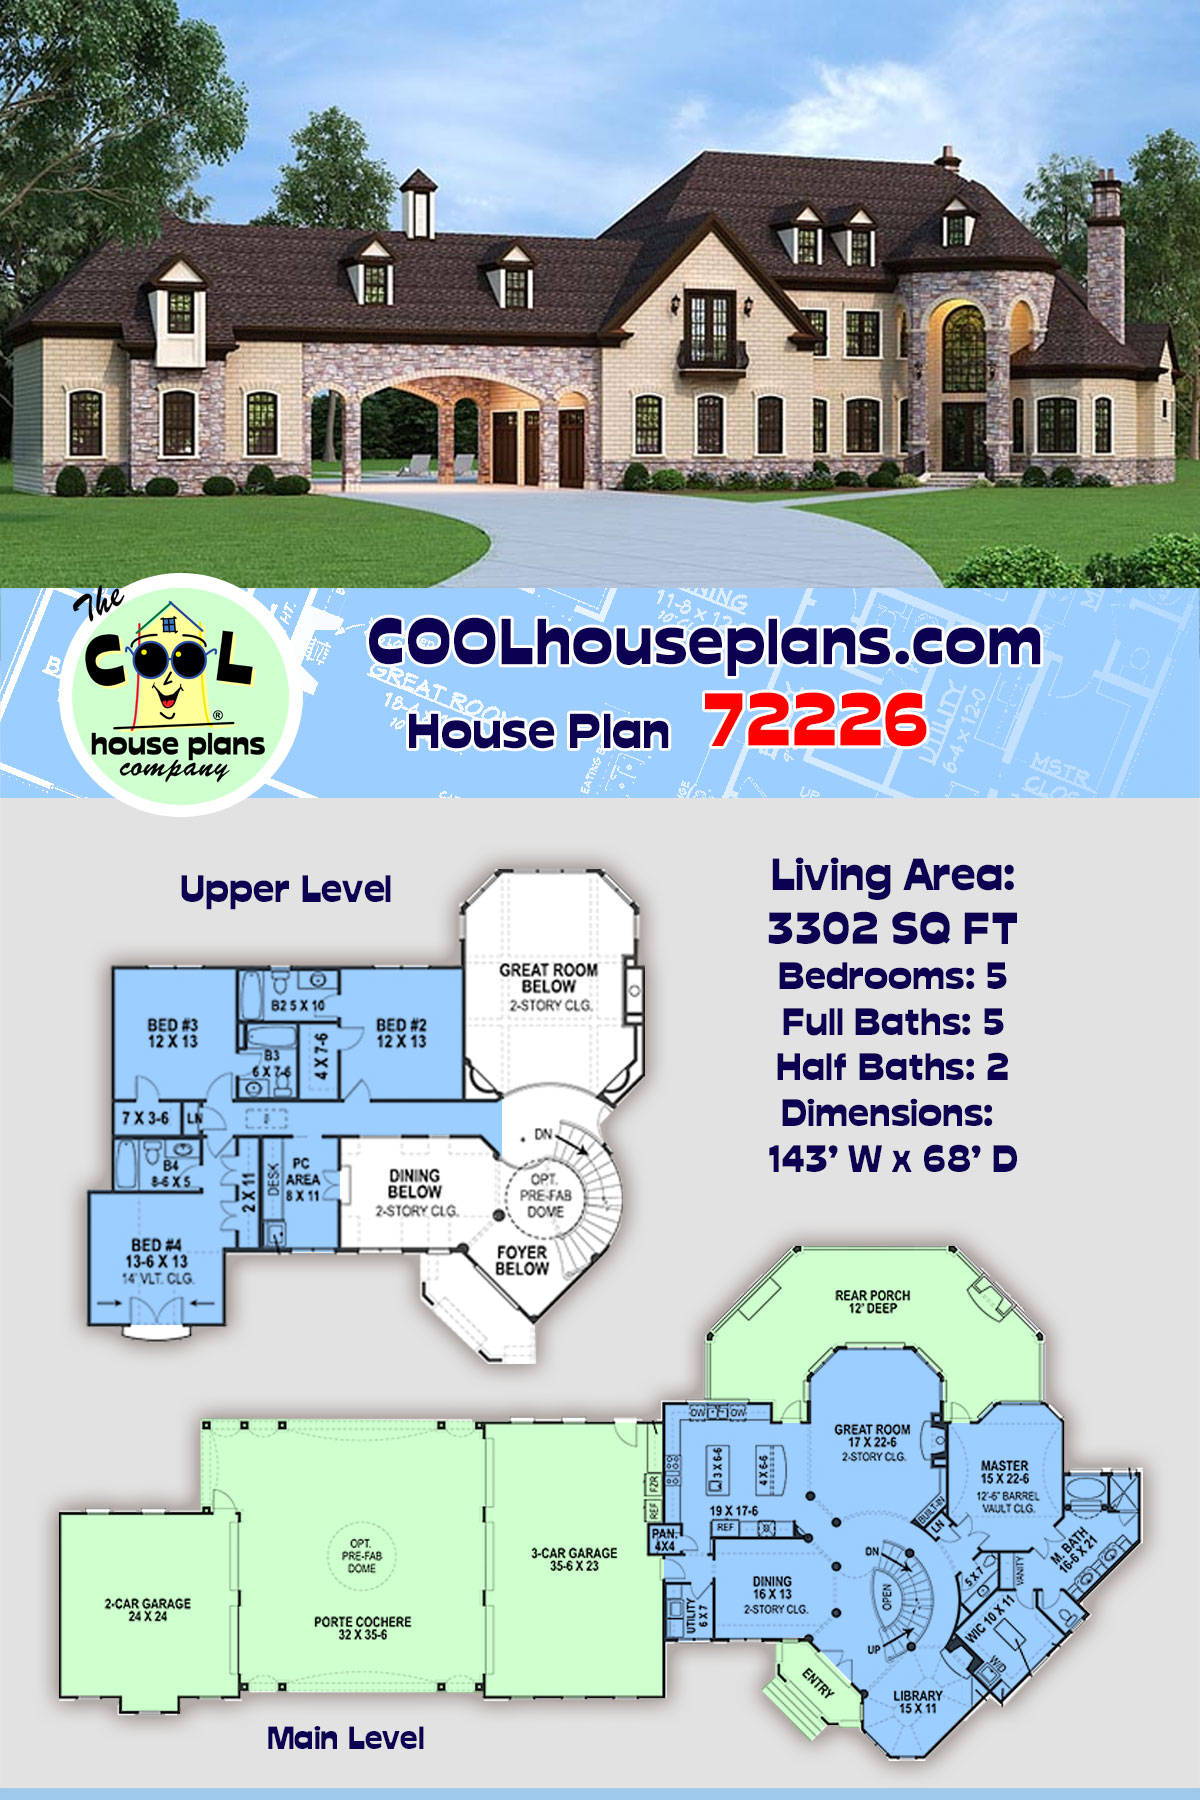 European, French Country House Plan 72226 with 4 Beds, 4 Baths, 5 Car Garage